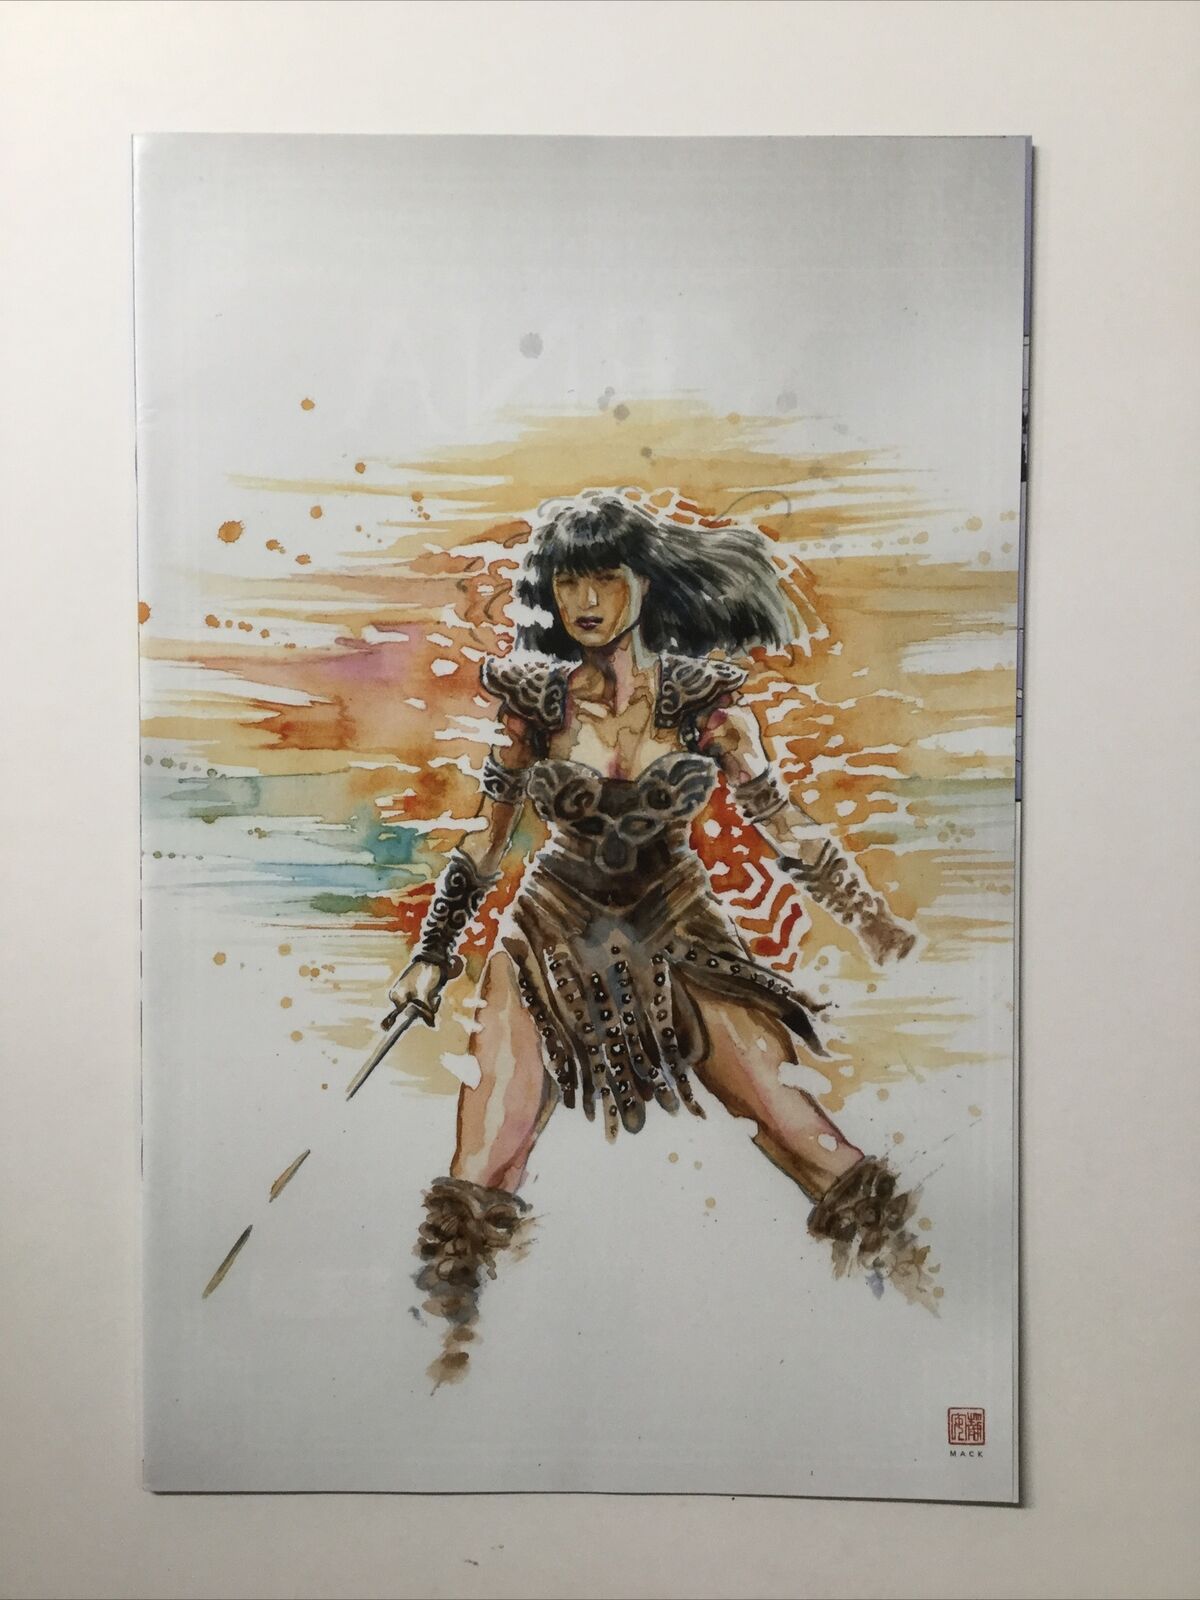 Xena Warrior Princess Vol 3 Issue 4 Cover D Variant Incentive Near Mint Dynamite